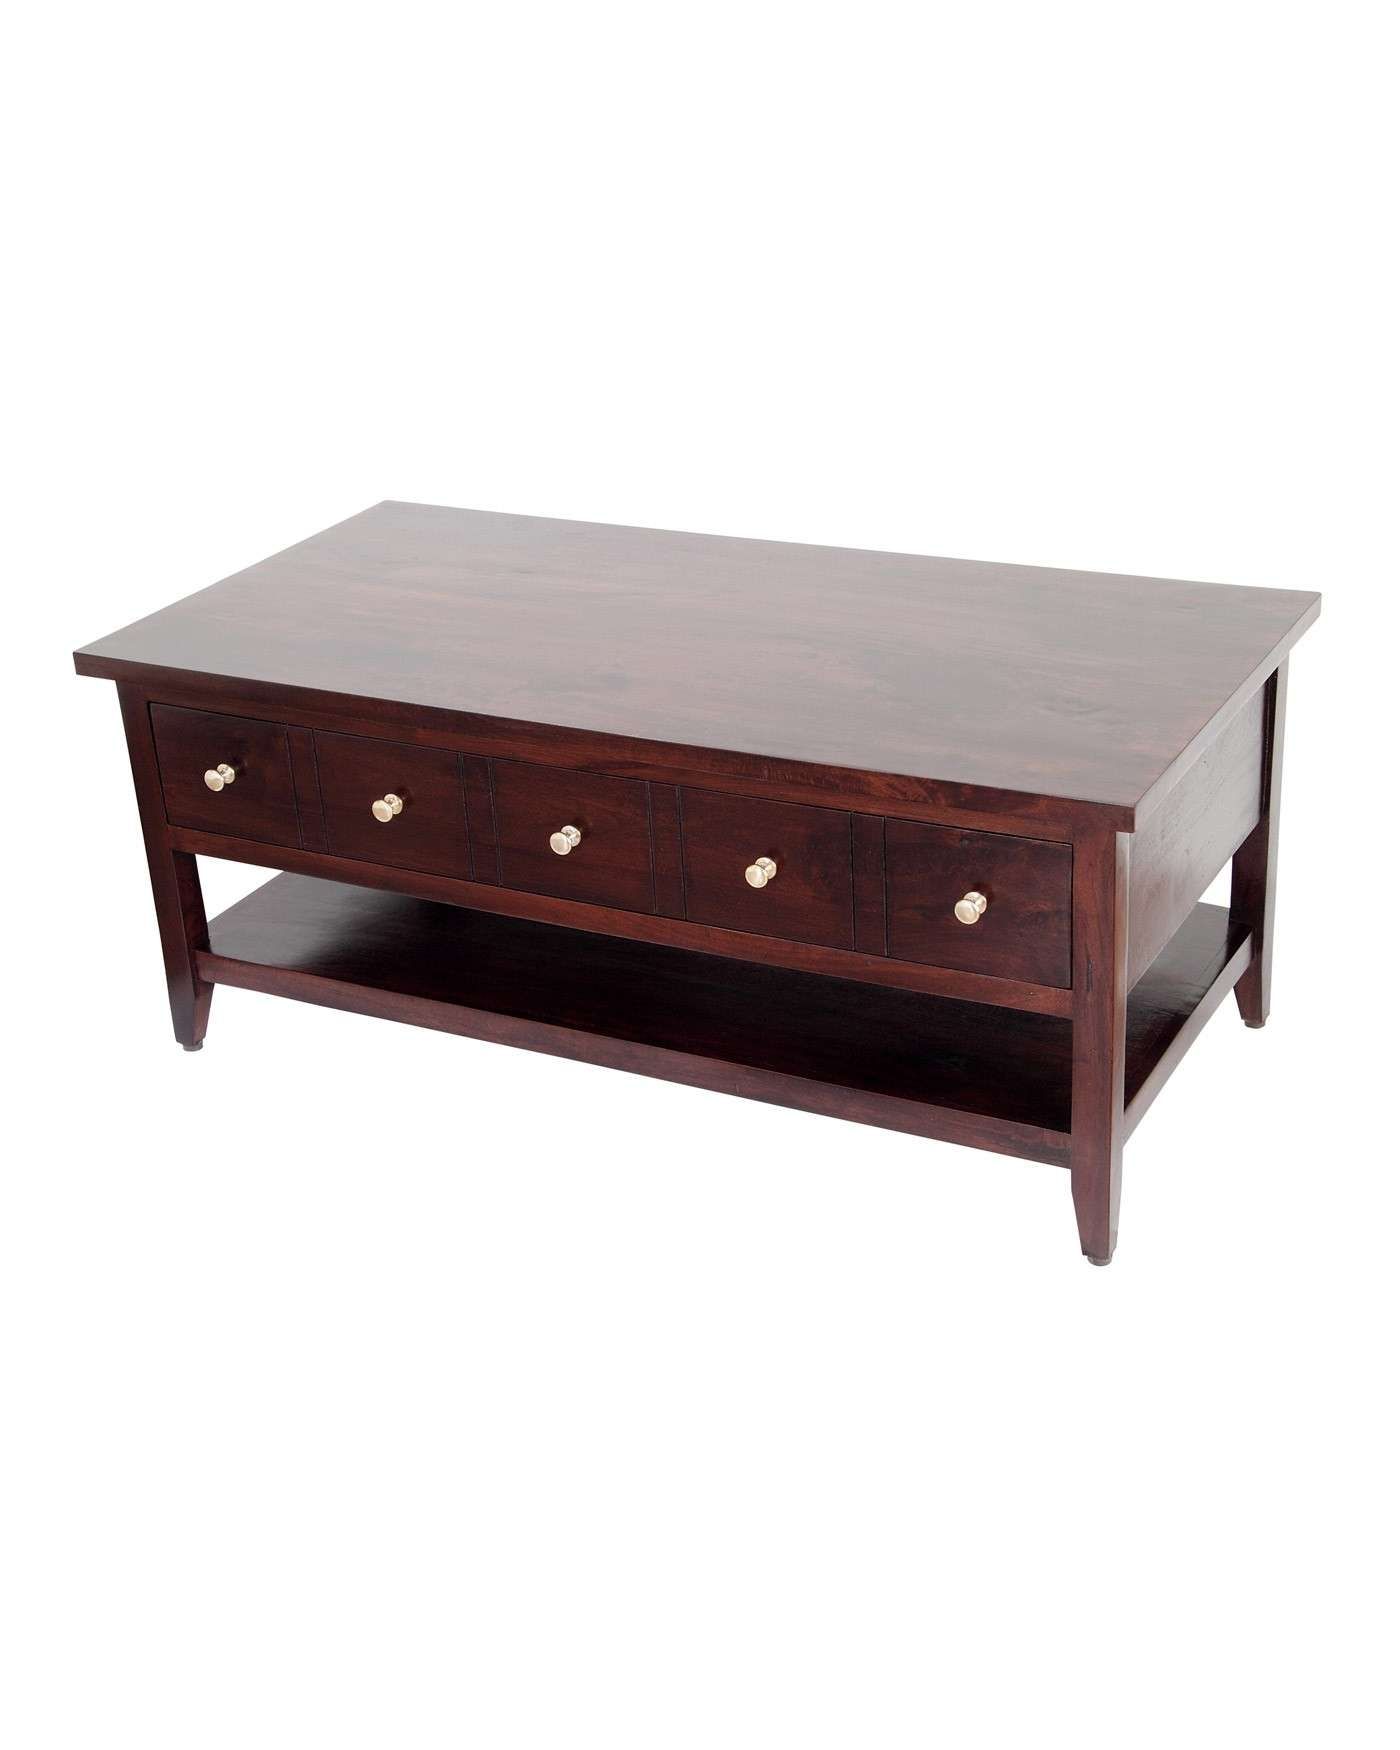 Coffee Tables : Dazzling Wooden Dark Wood Coffee Table With With Most Recent Low Coffee Tables With Drawers (View 12 of 20)